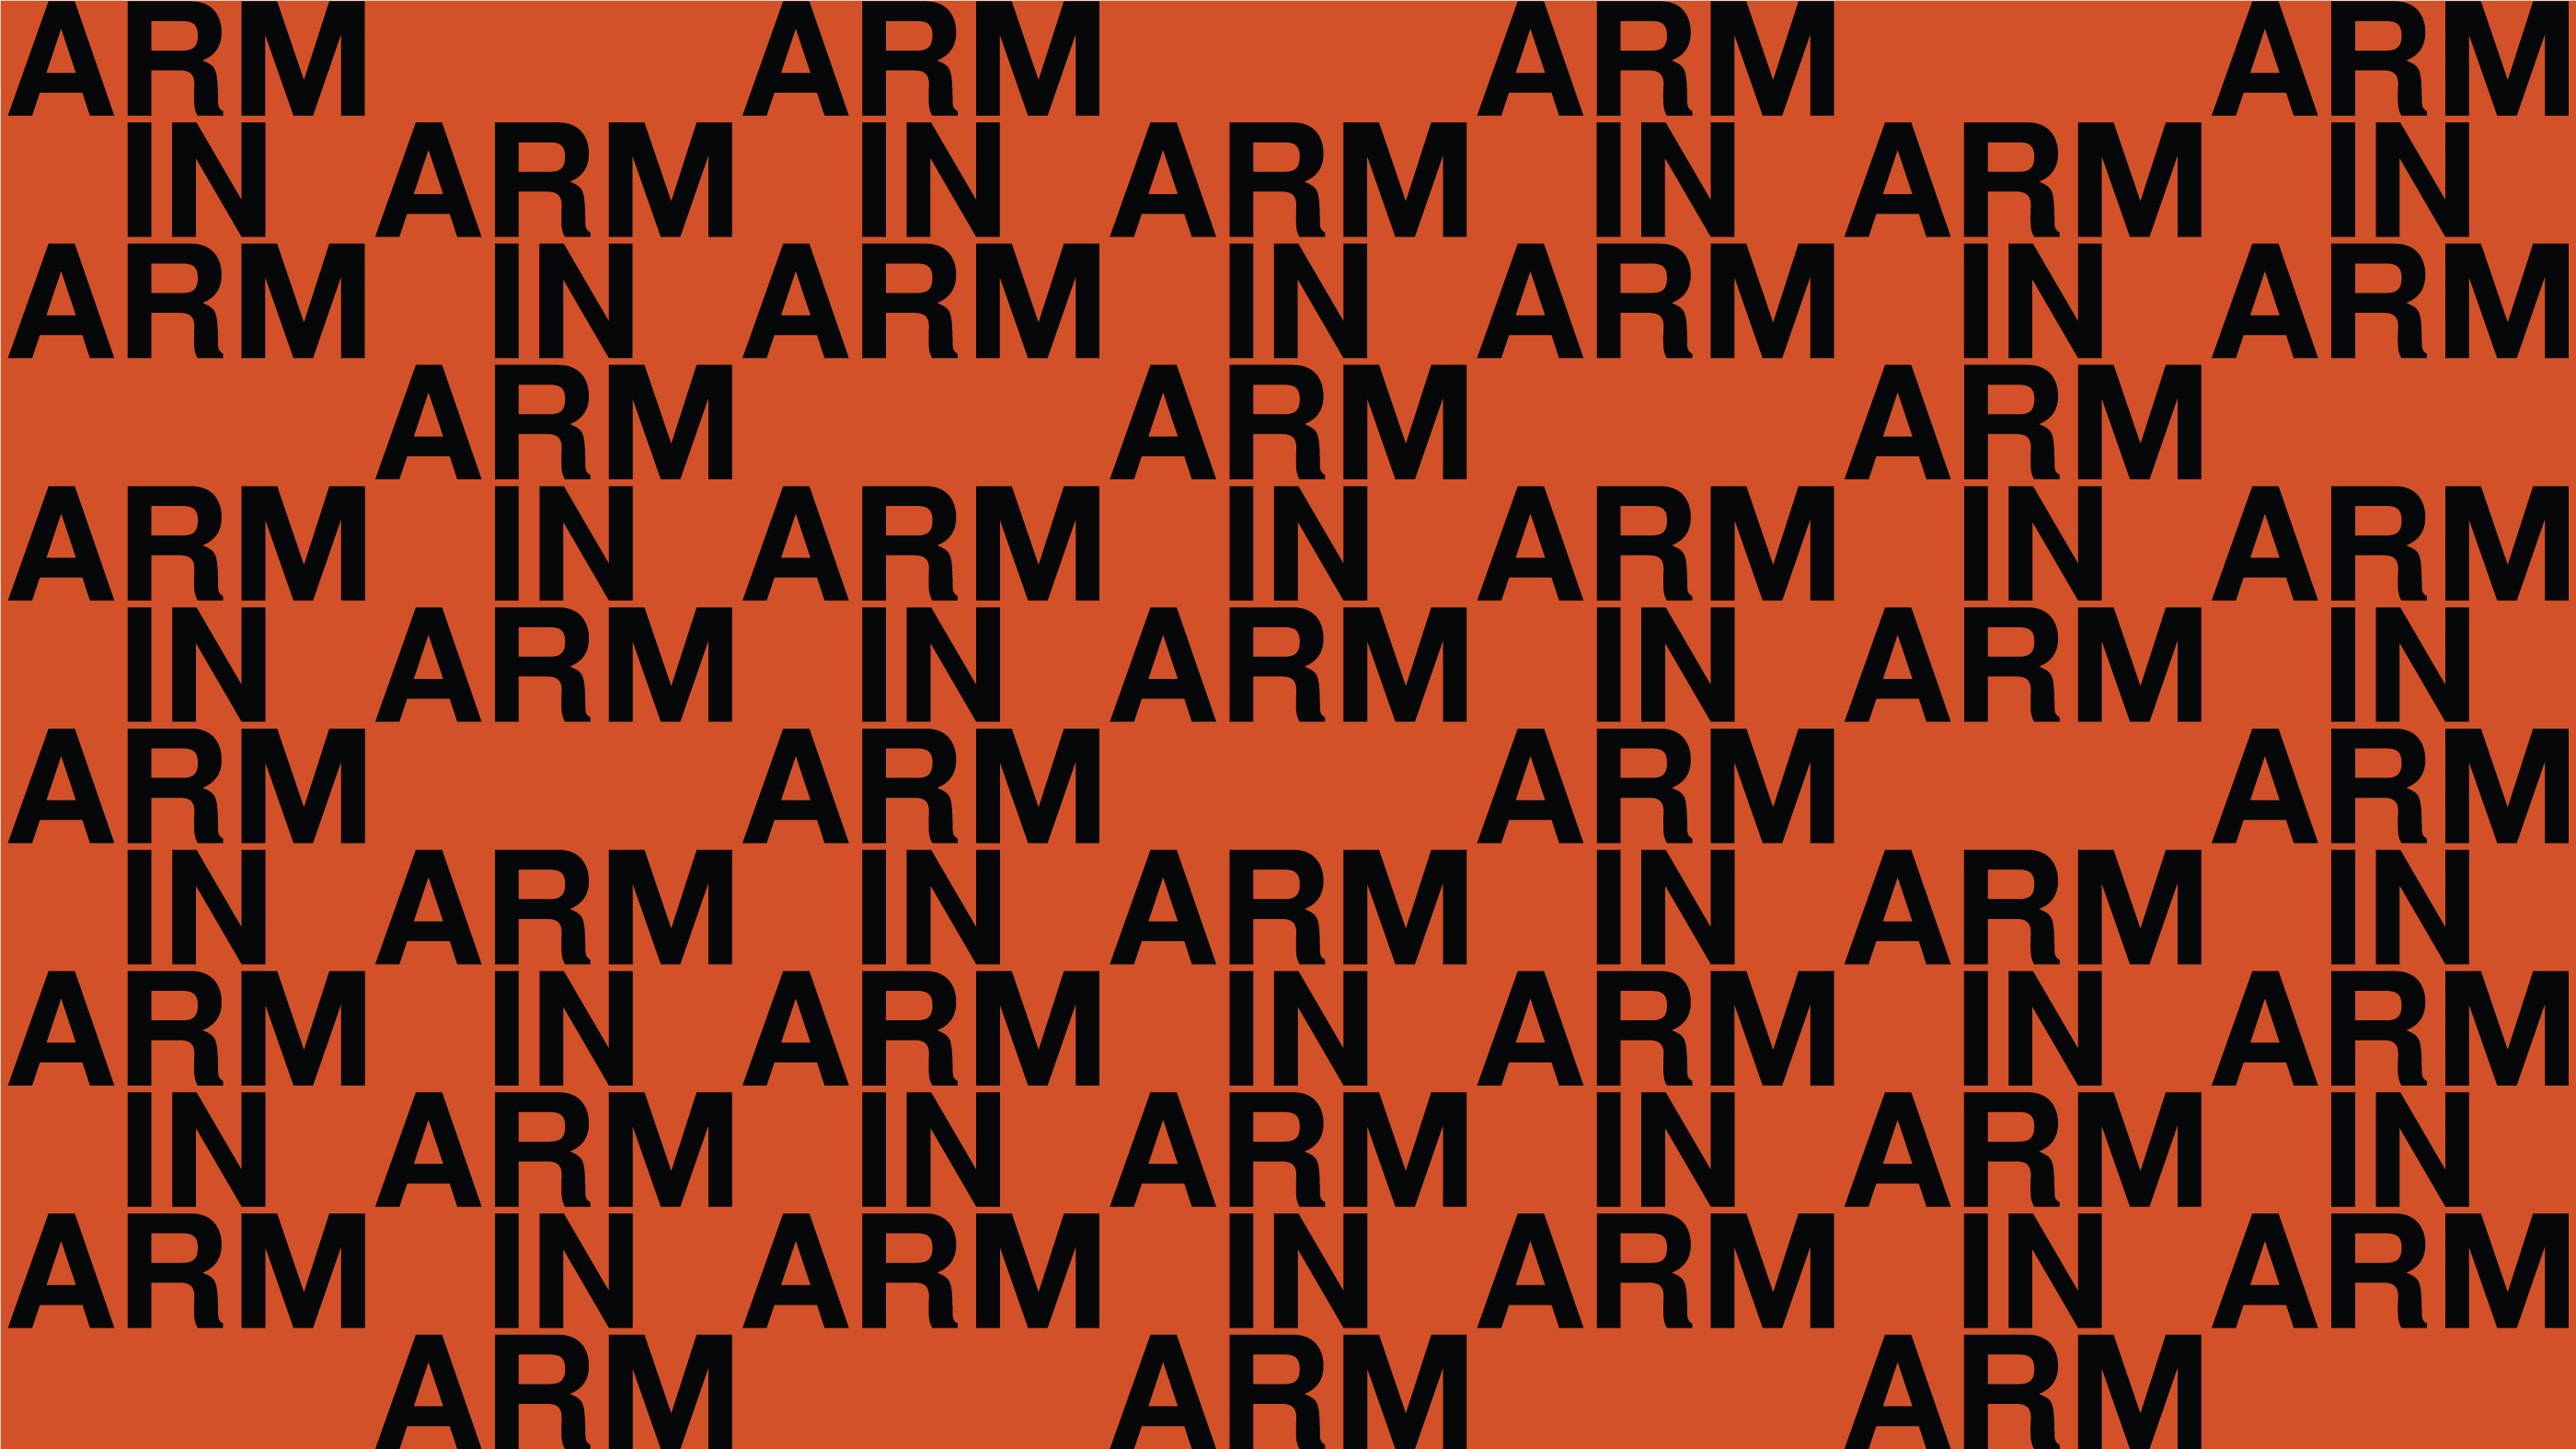 Arm-in-Arm_8